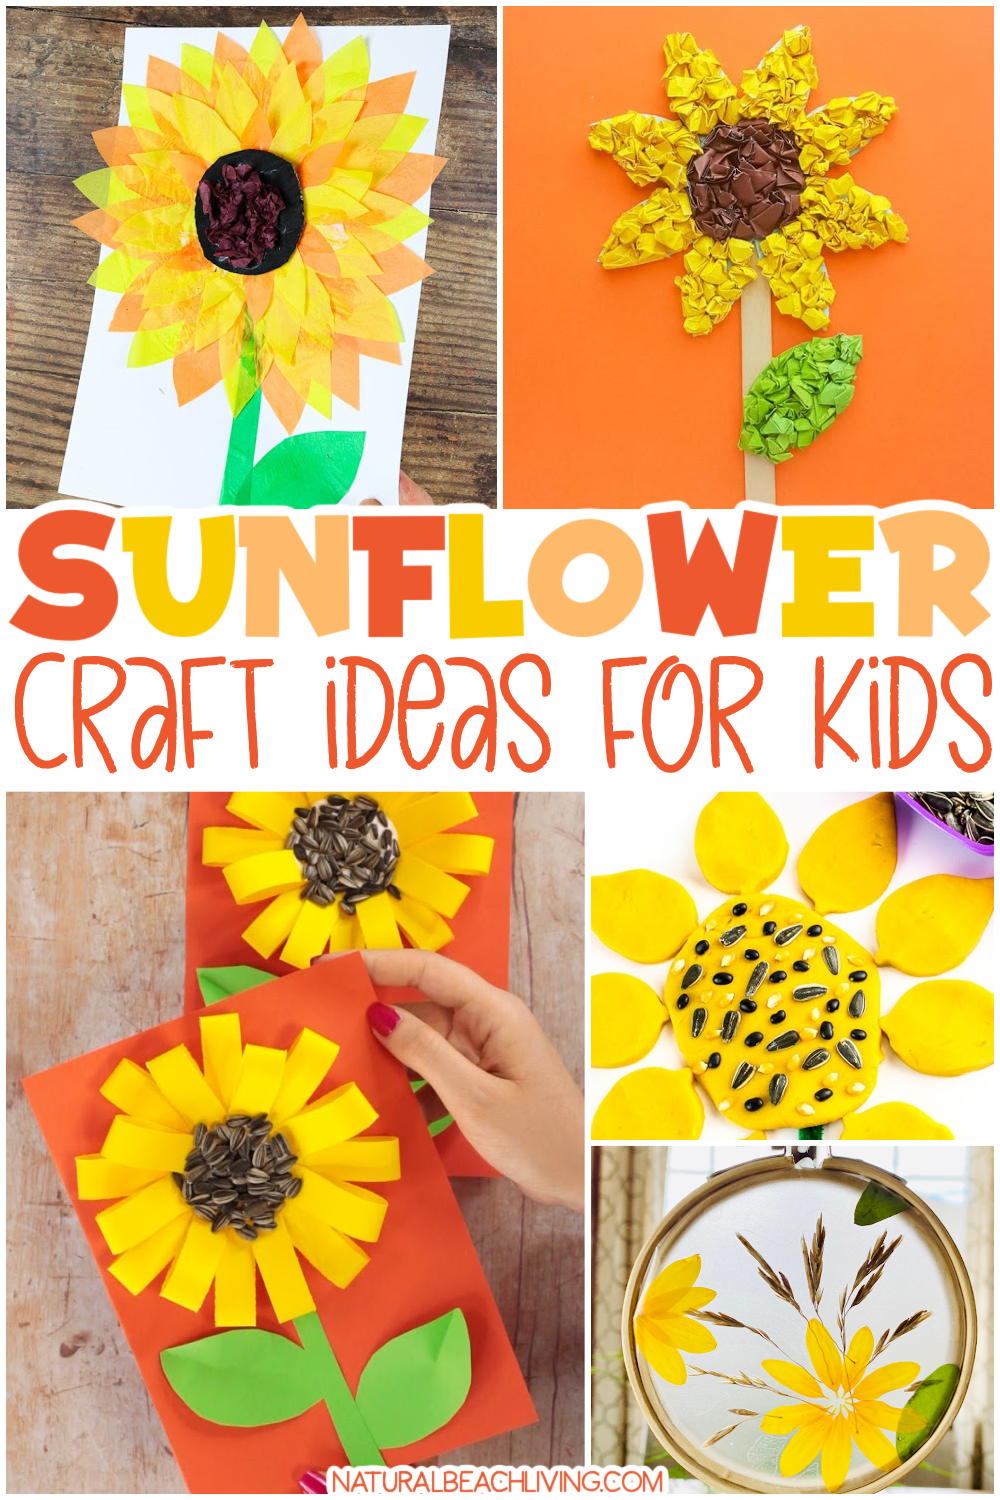 20+ Sunflower Art and Crafts to Make - Natural Beach Living